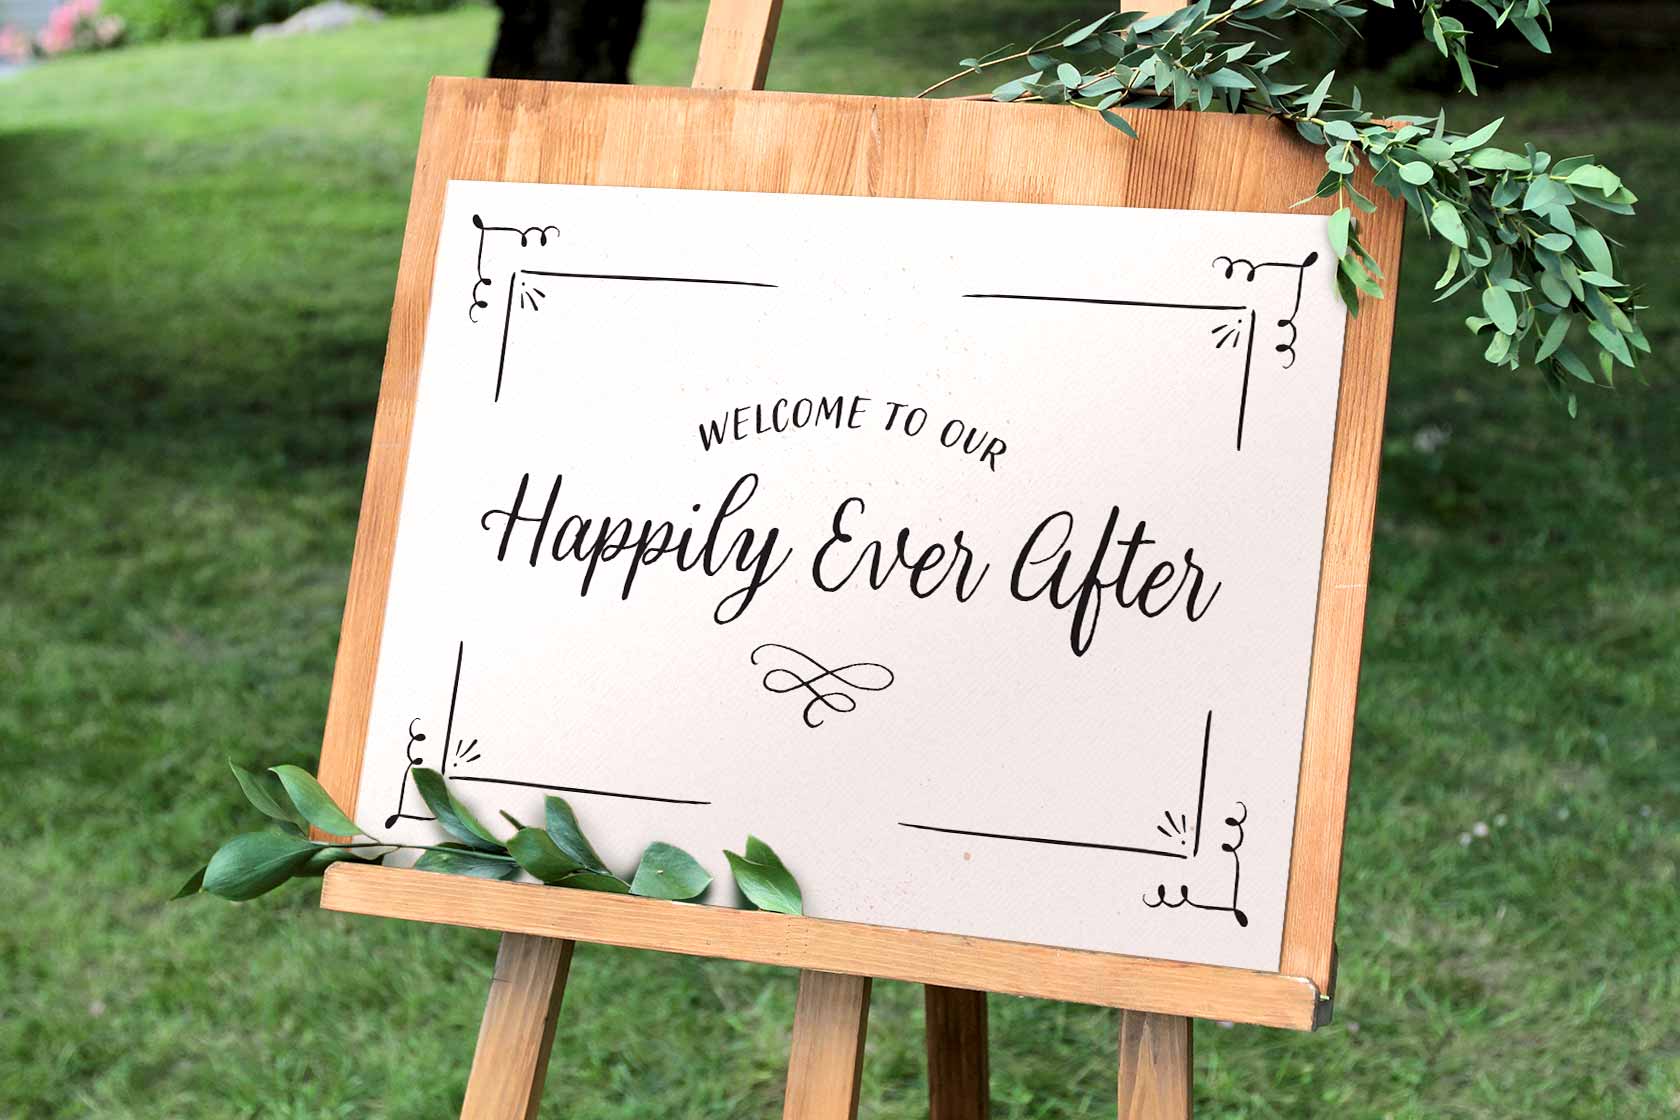 "Welcome to Our Happily Ever After" wedding welcome sign idea